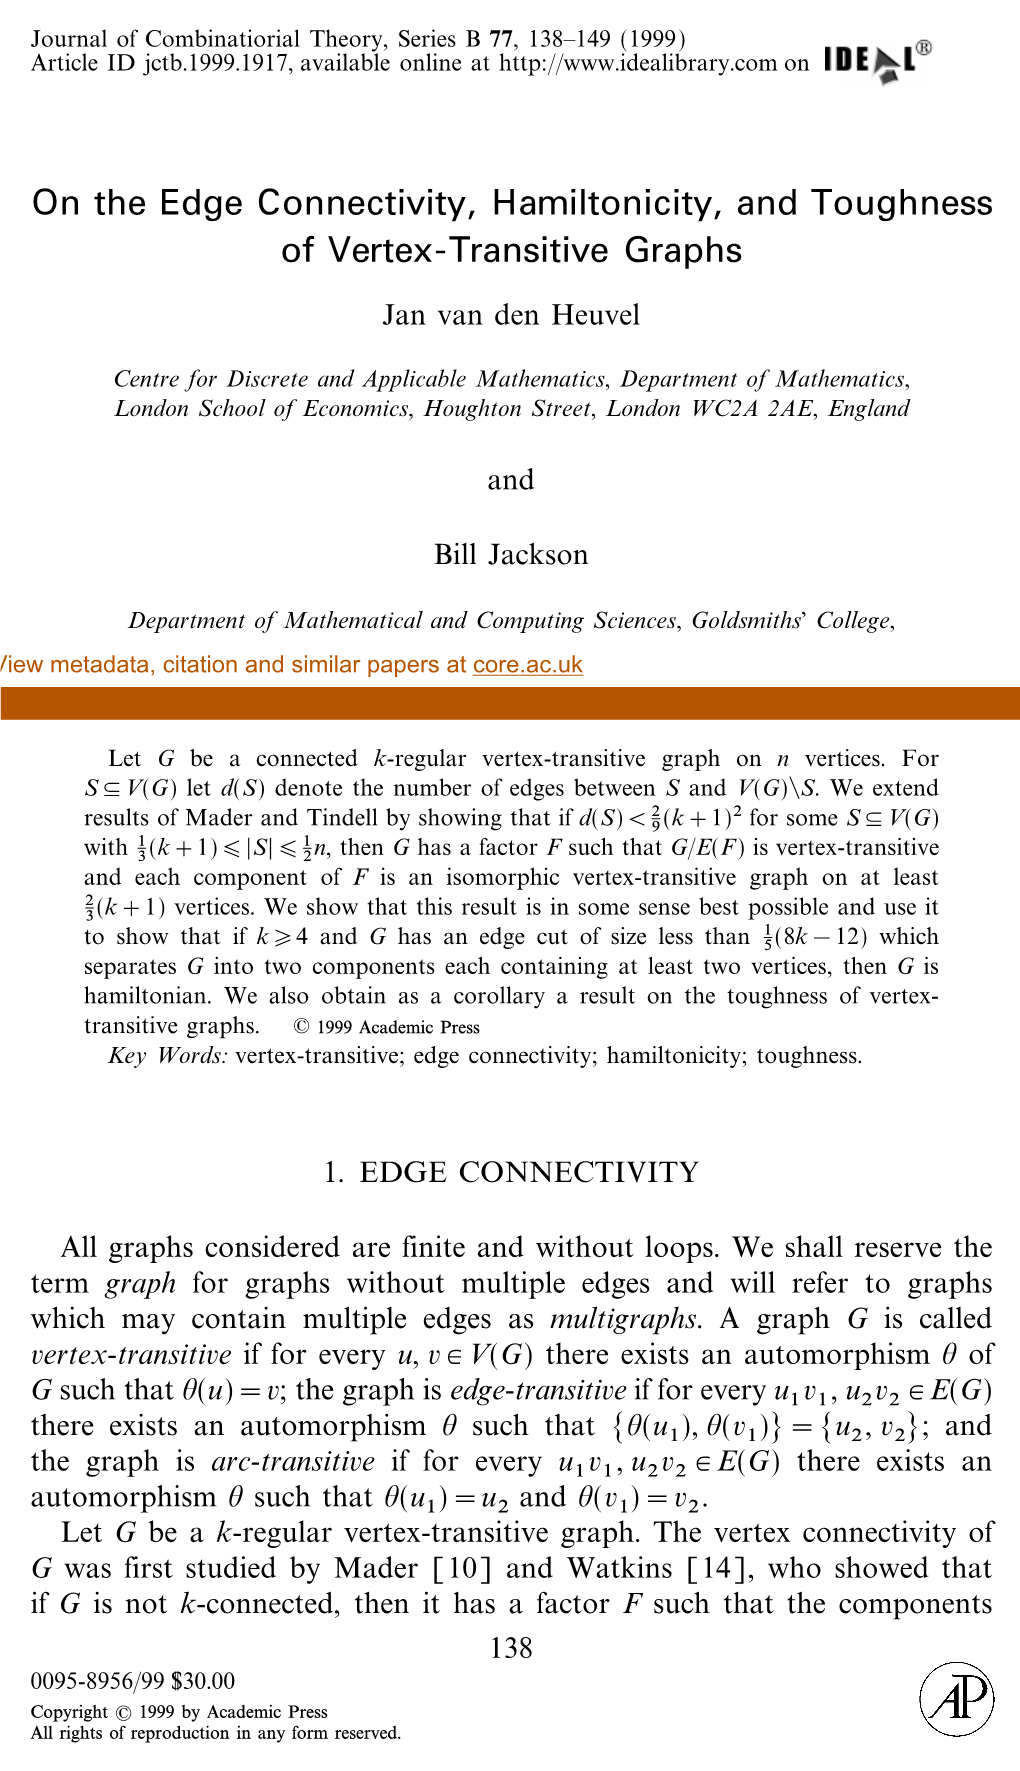 On the Edge Connectivity, Hamiltonicity, and Toughness of Vertex-Transitive Graphs